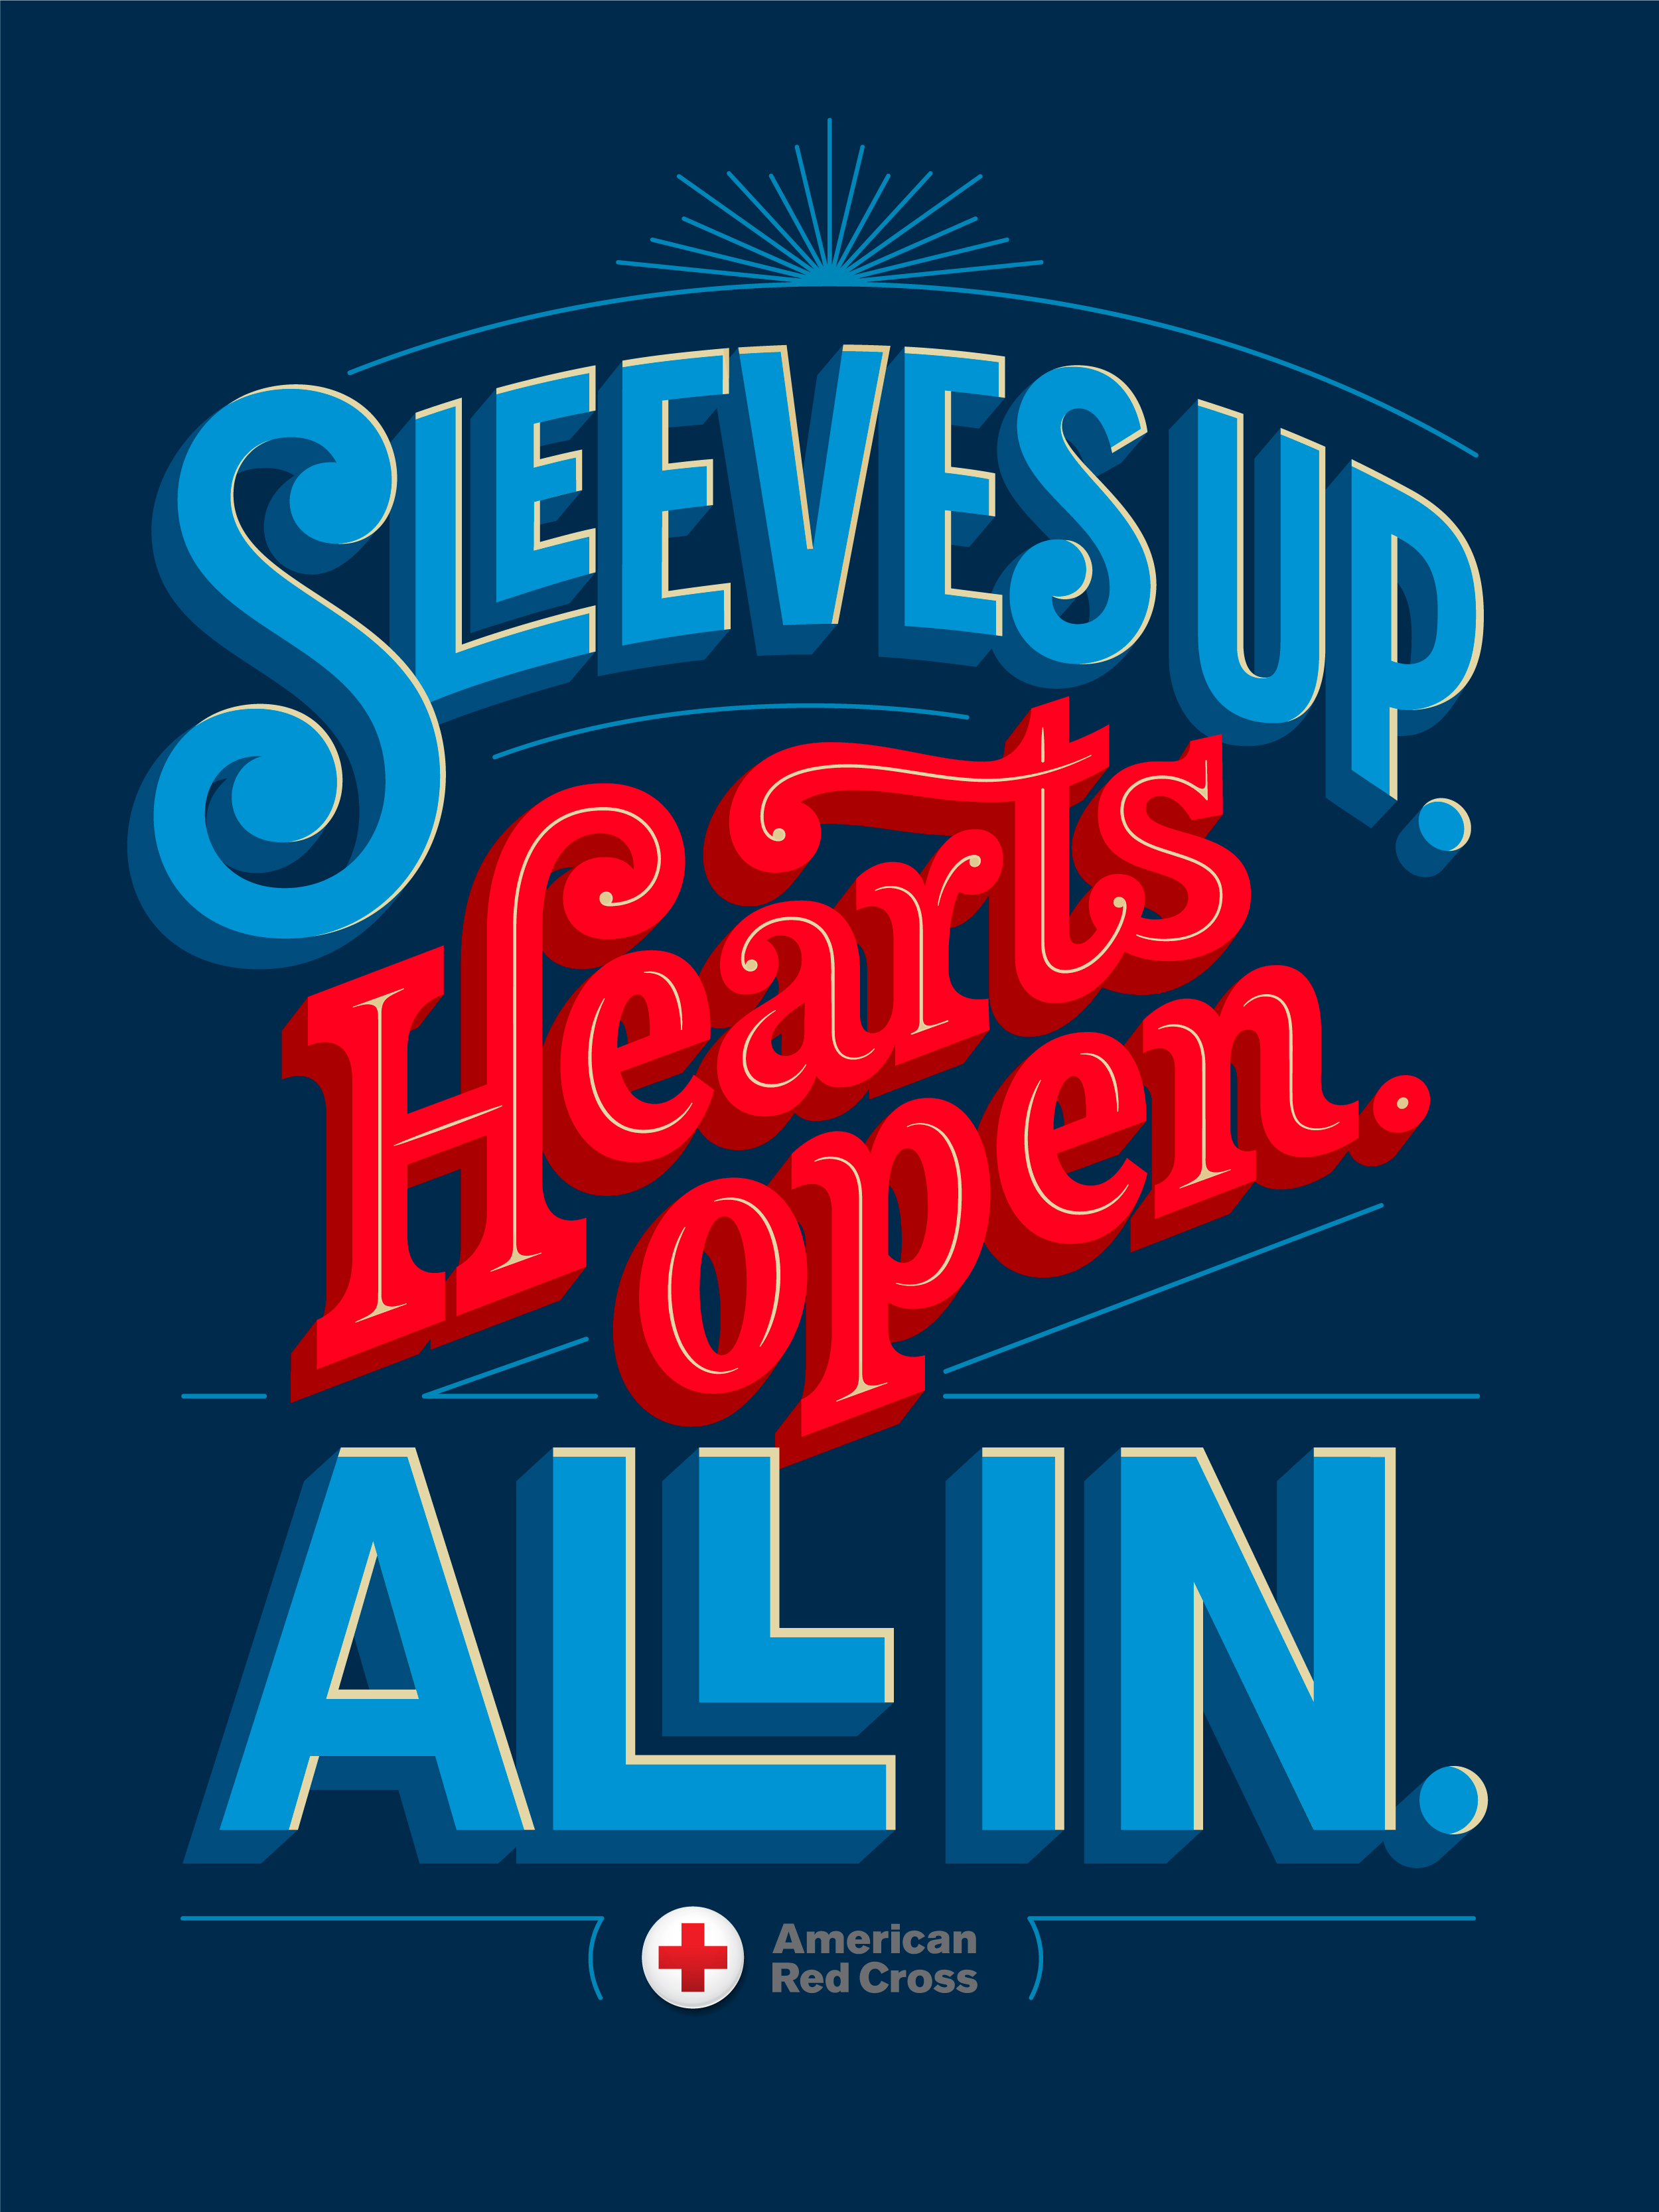 Sleeves up hearts open all in poster for the American Red Cross by Jessica Hische